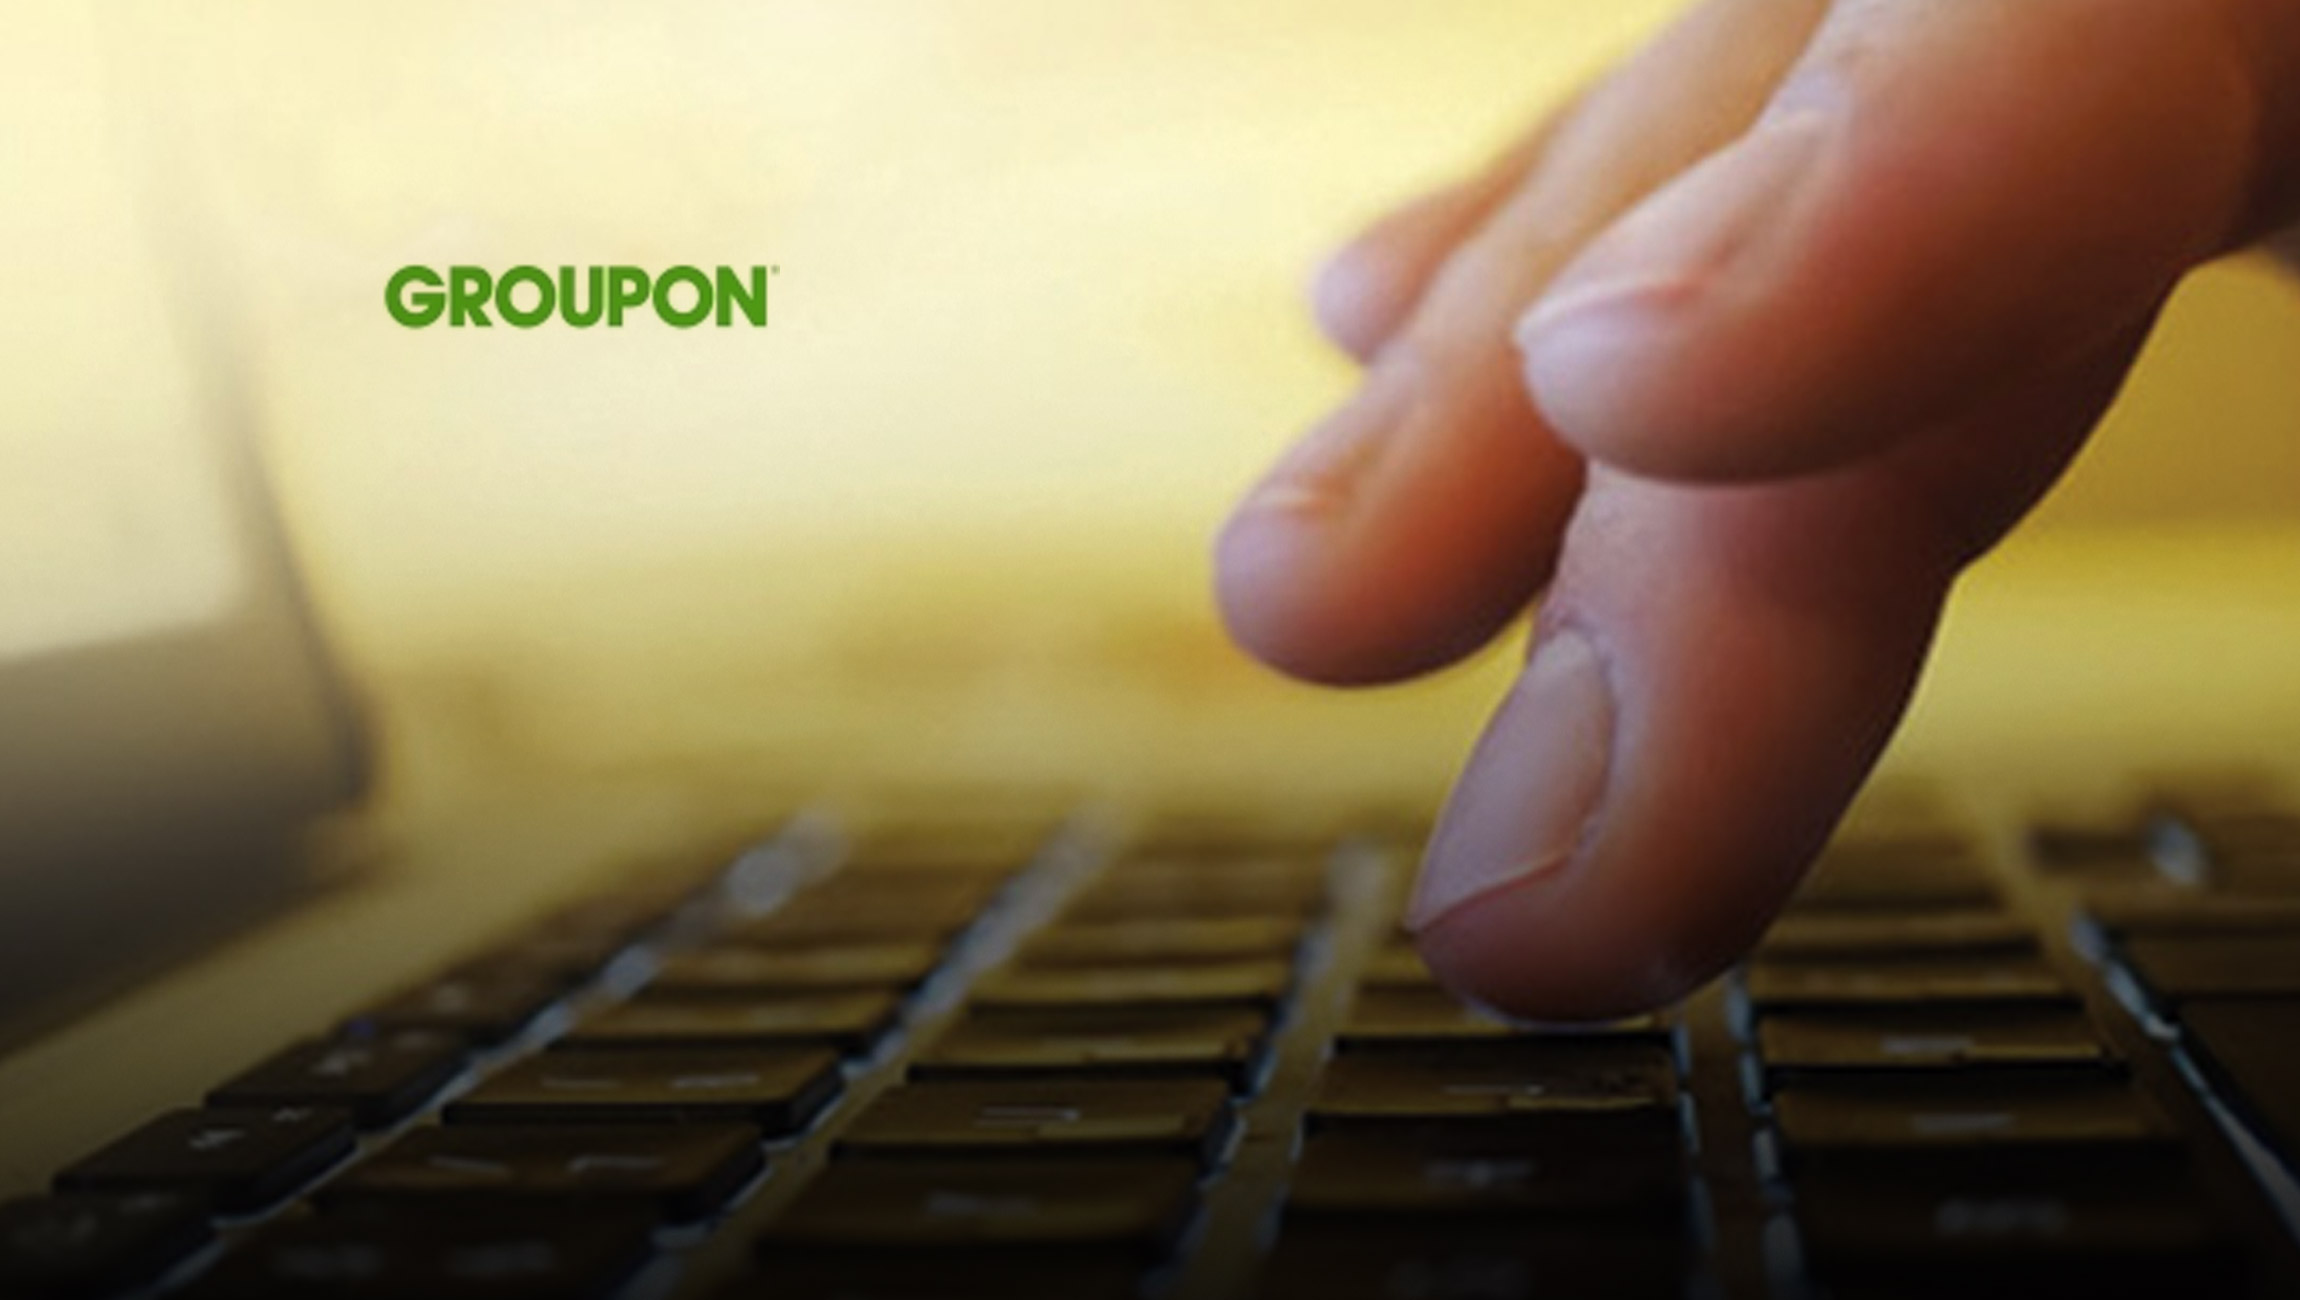 Groupon is Streamlining Its Technology Platform and Embracing Automation